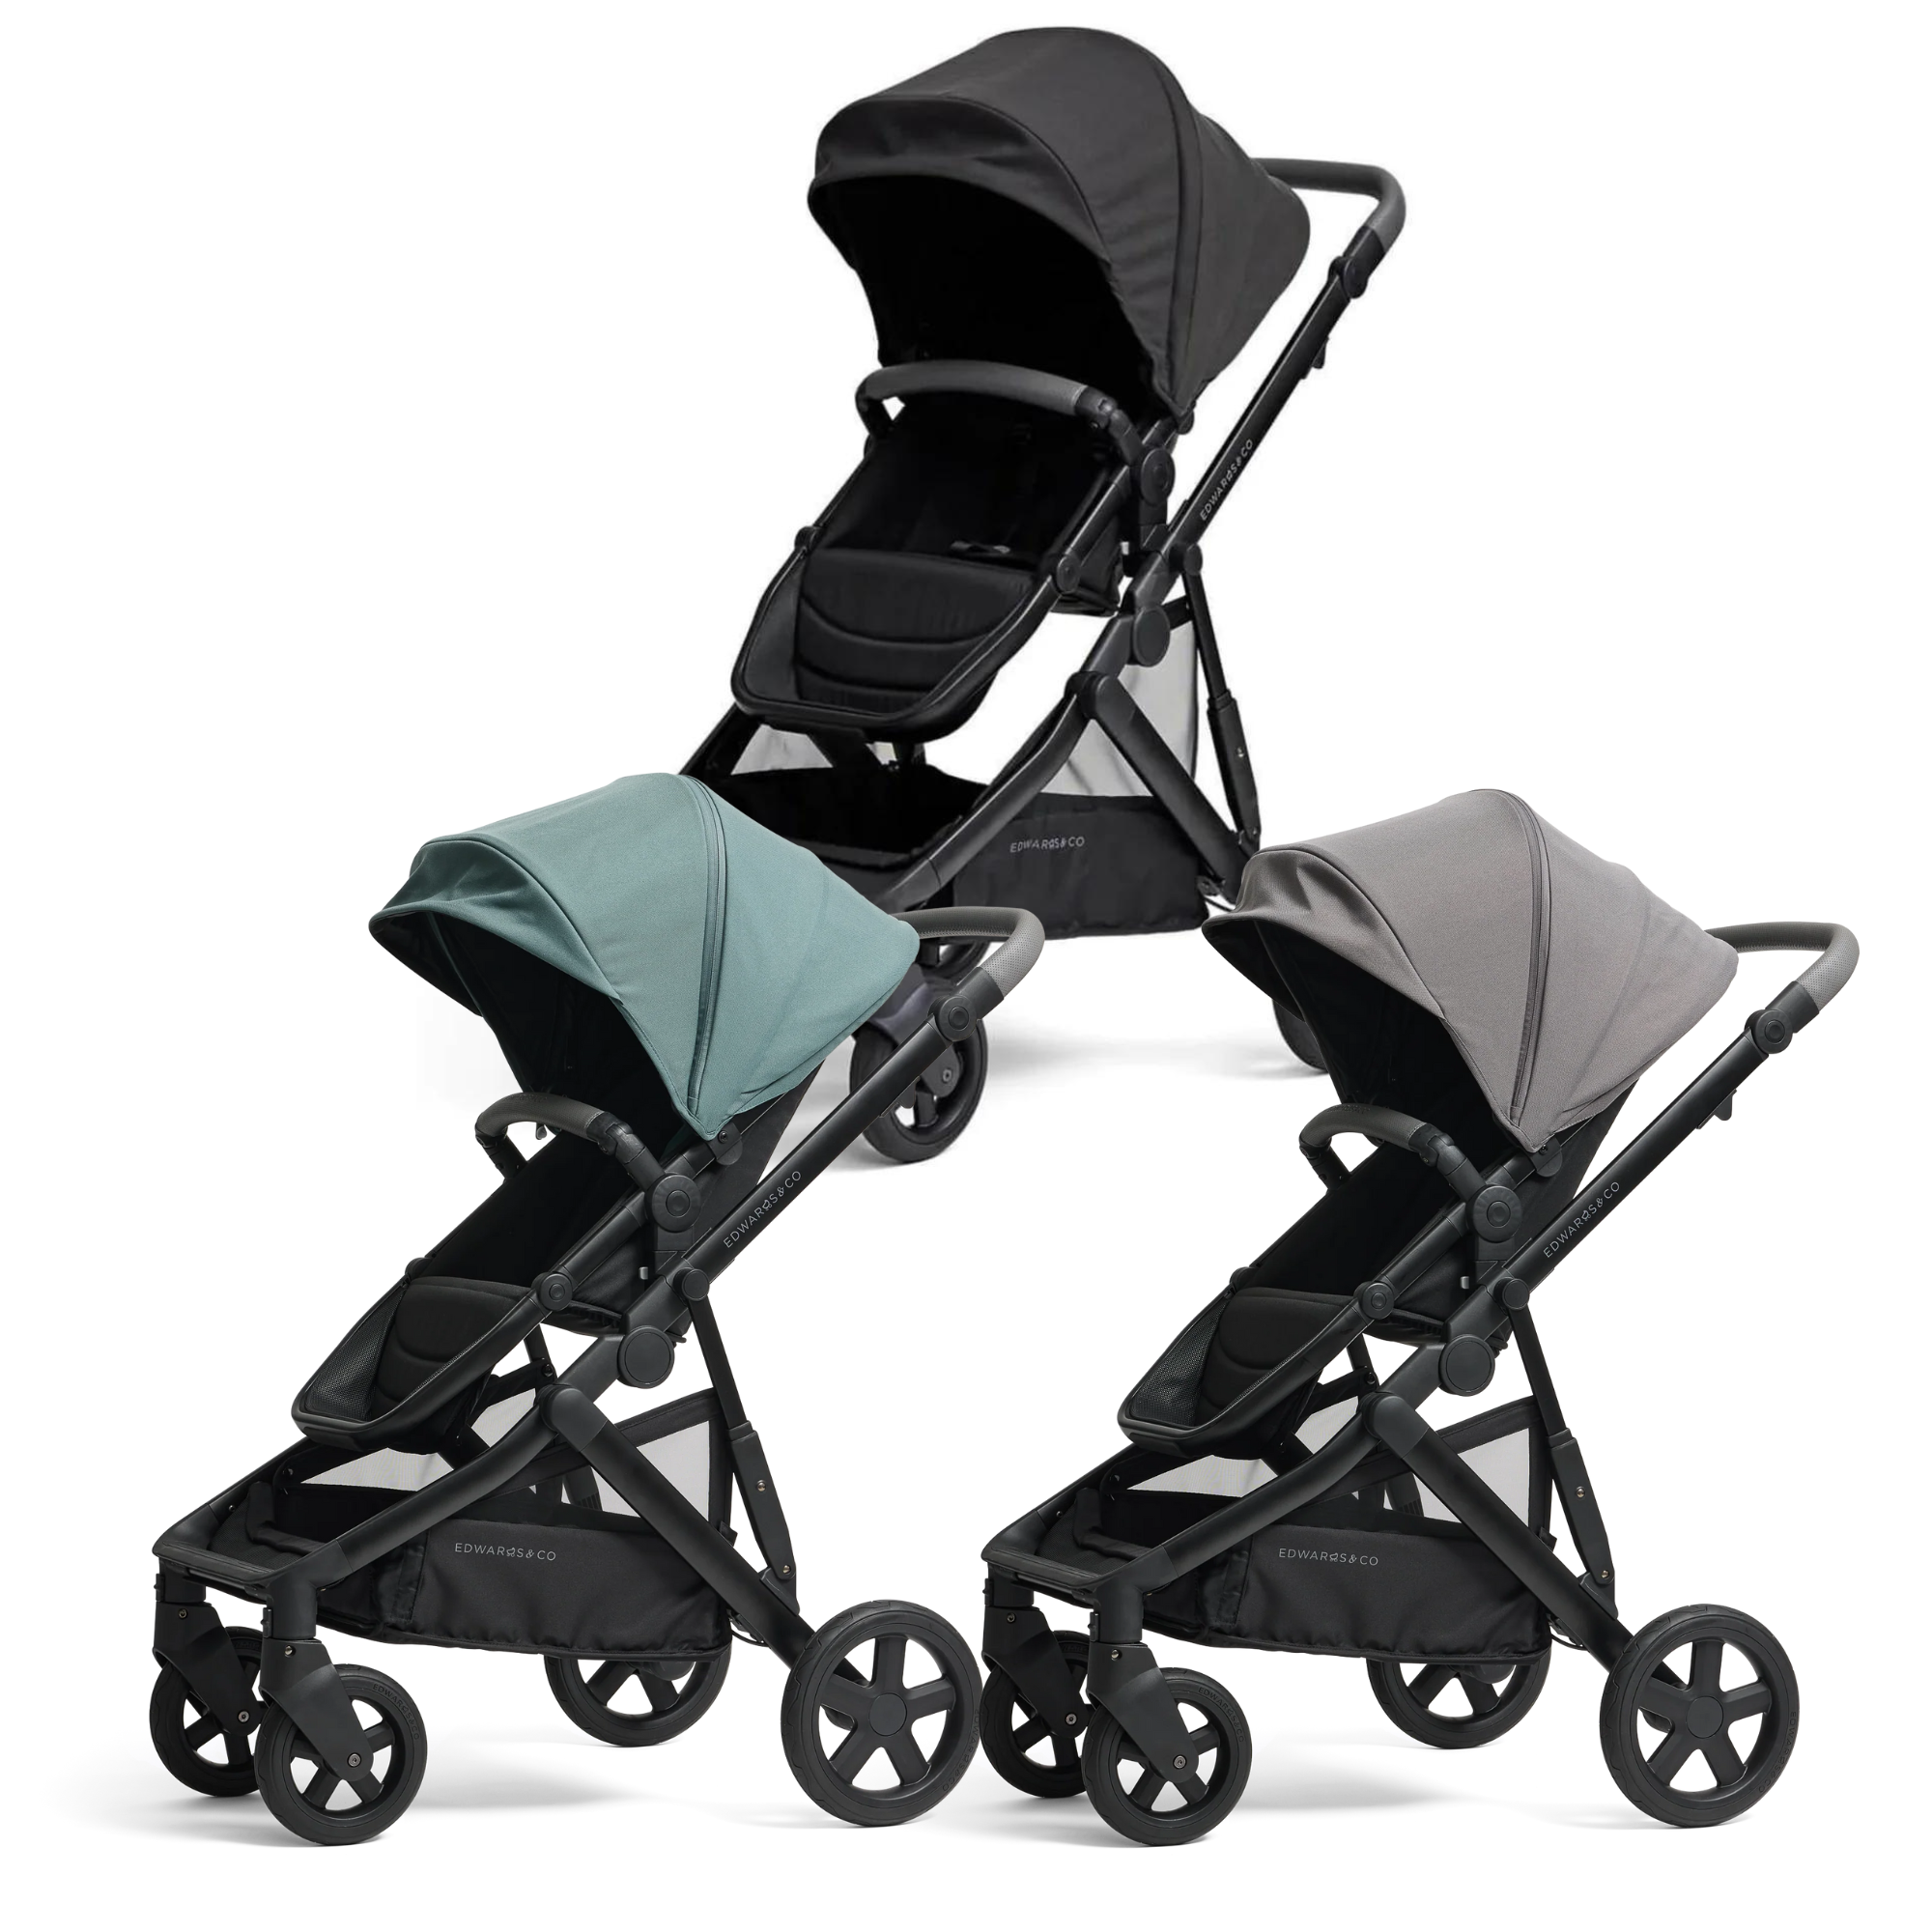 Edwards & Co Olive Stroller (Sale Ends 15 May) - Tiny Tots Baby Store 